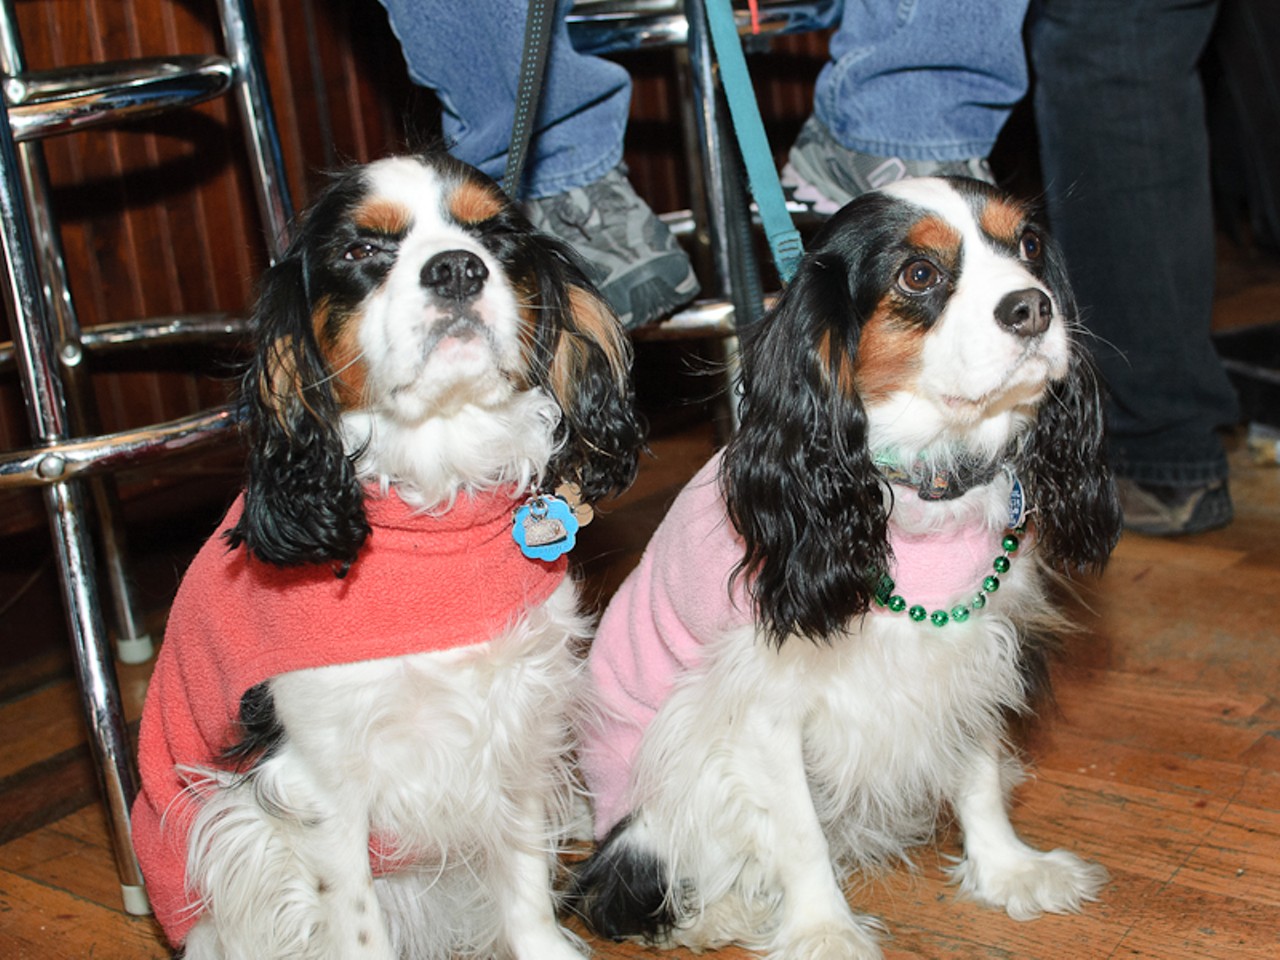 Many restaurants in and around the Soulard area were catering to the canines this weekend.